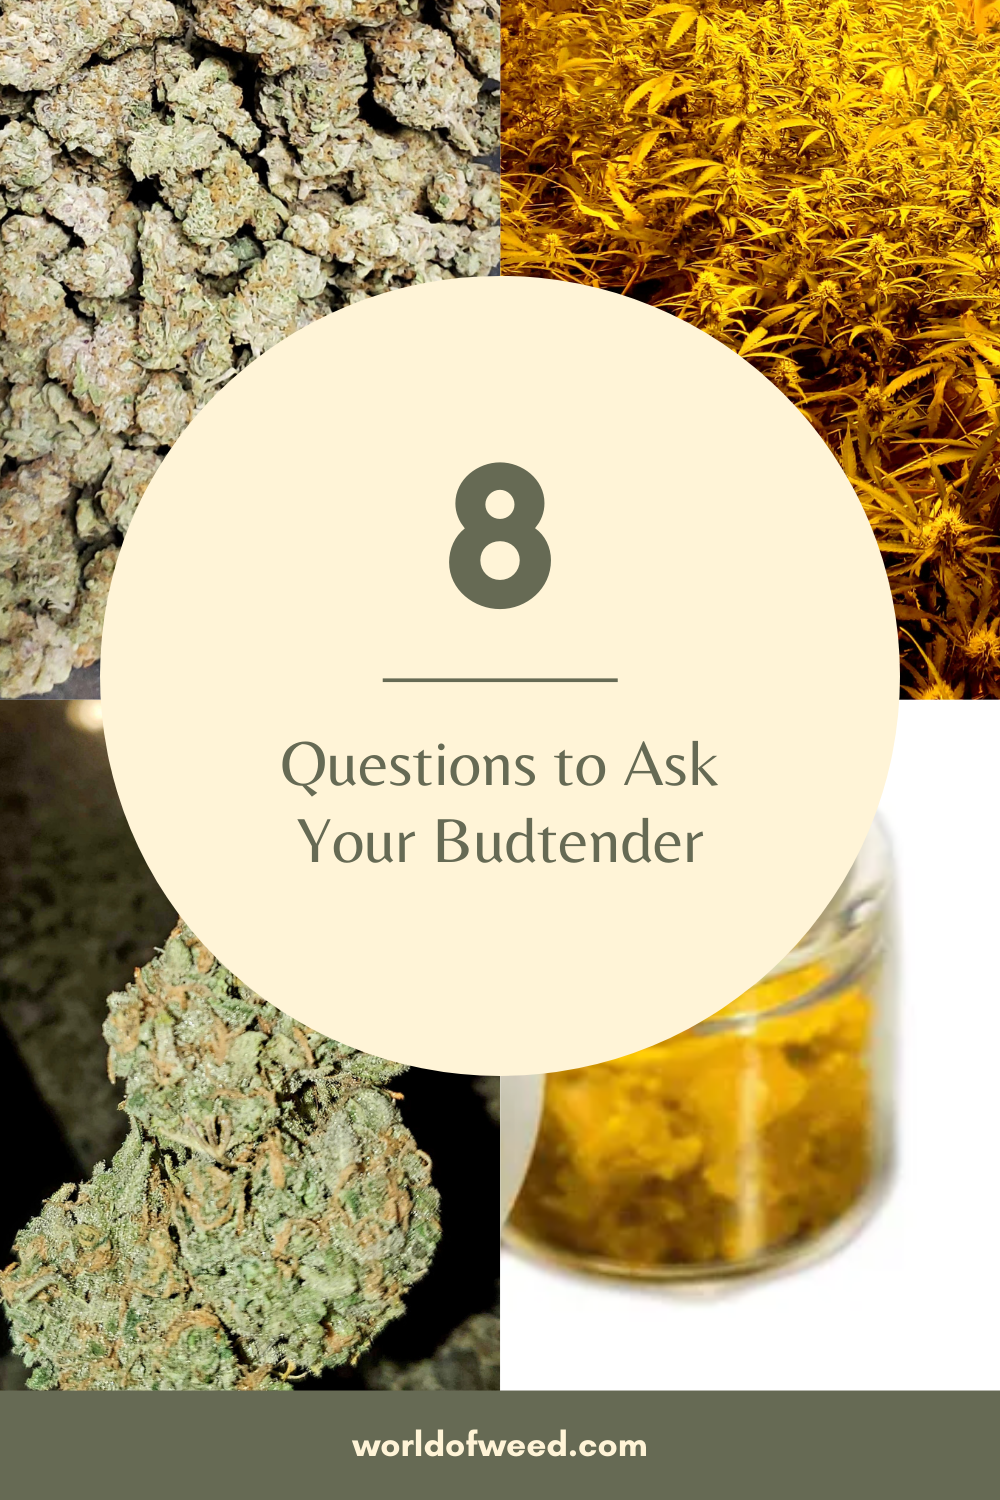 8 Questions to Ask Your Budtender